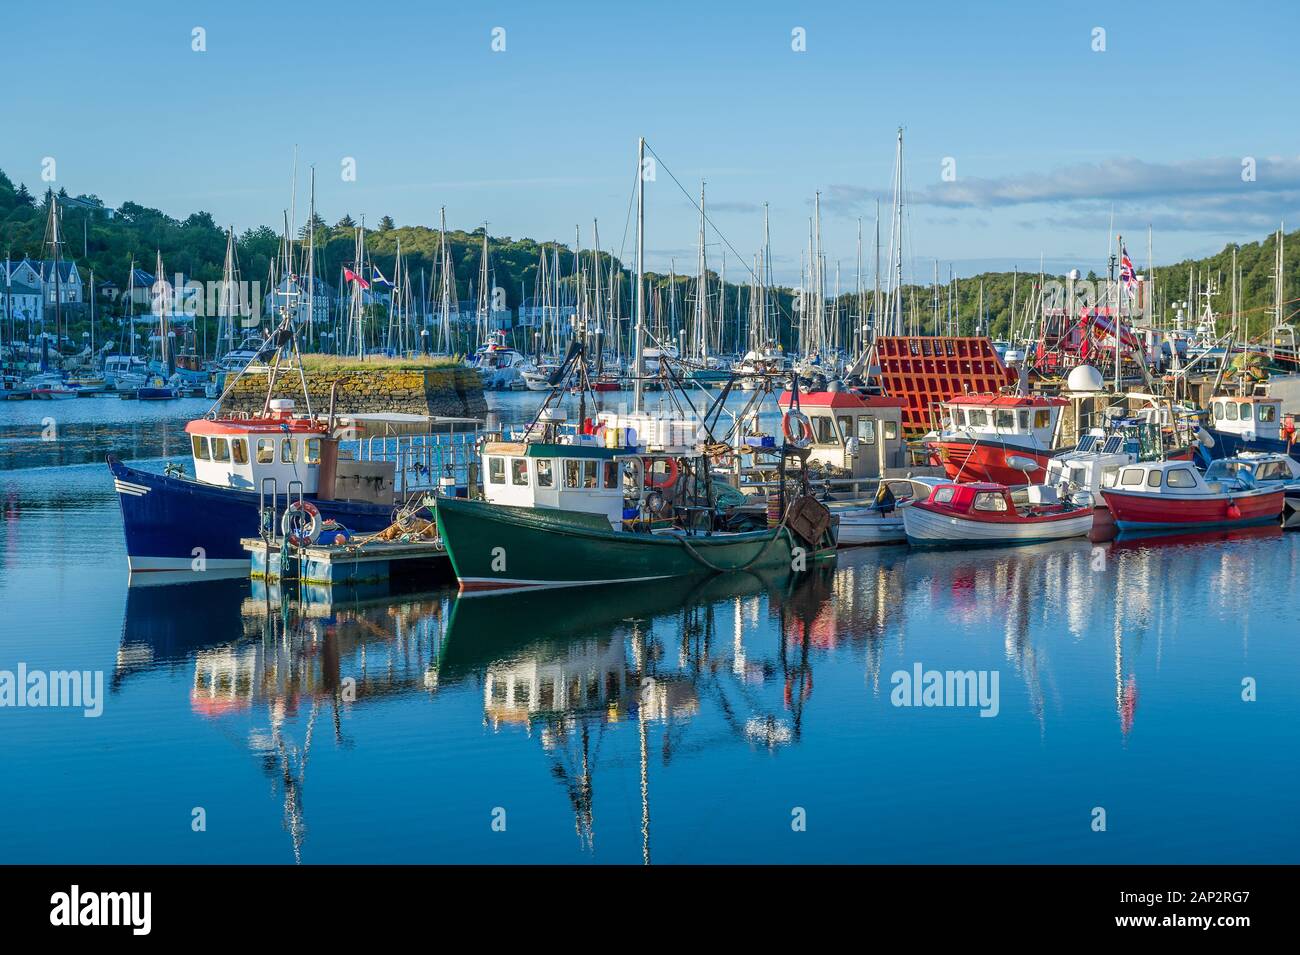 Beautiful calm day in Tarbert harbor. Colorful loal's boats and water reflections. Inner Hebrides, Scotland. Stock Photo